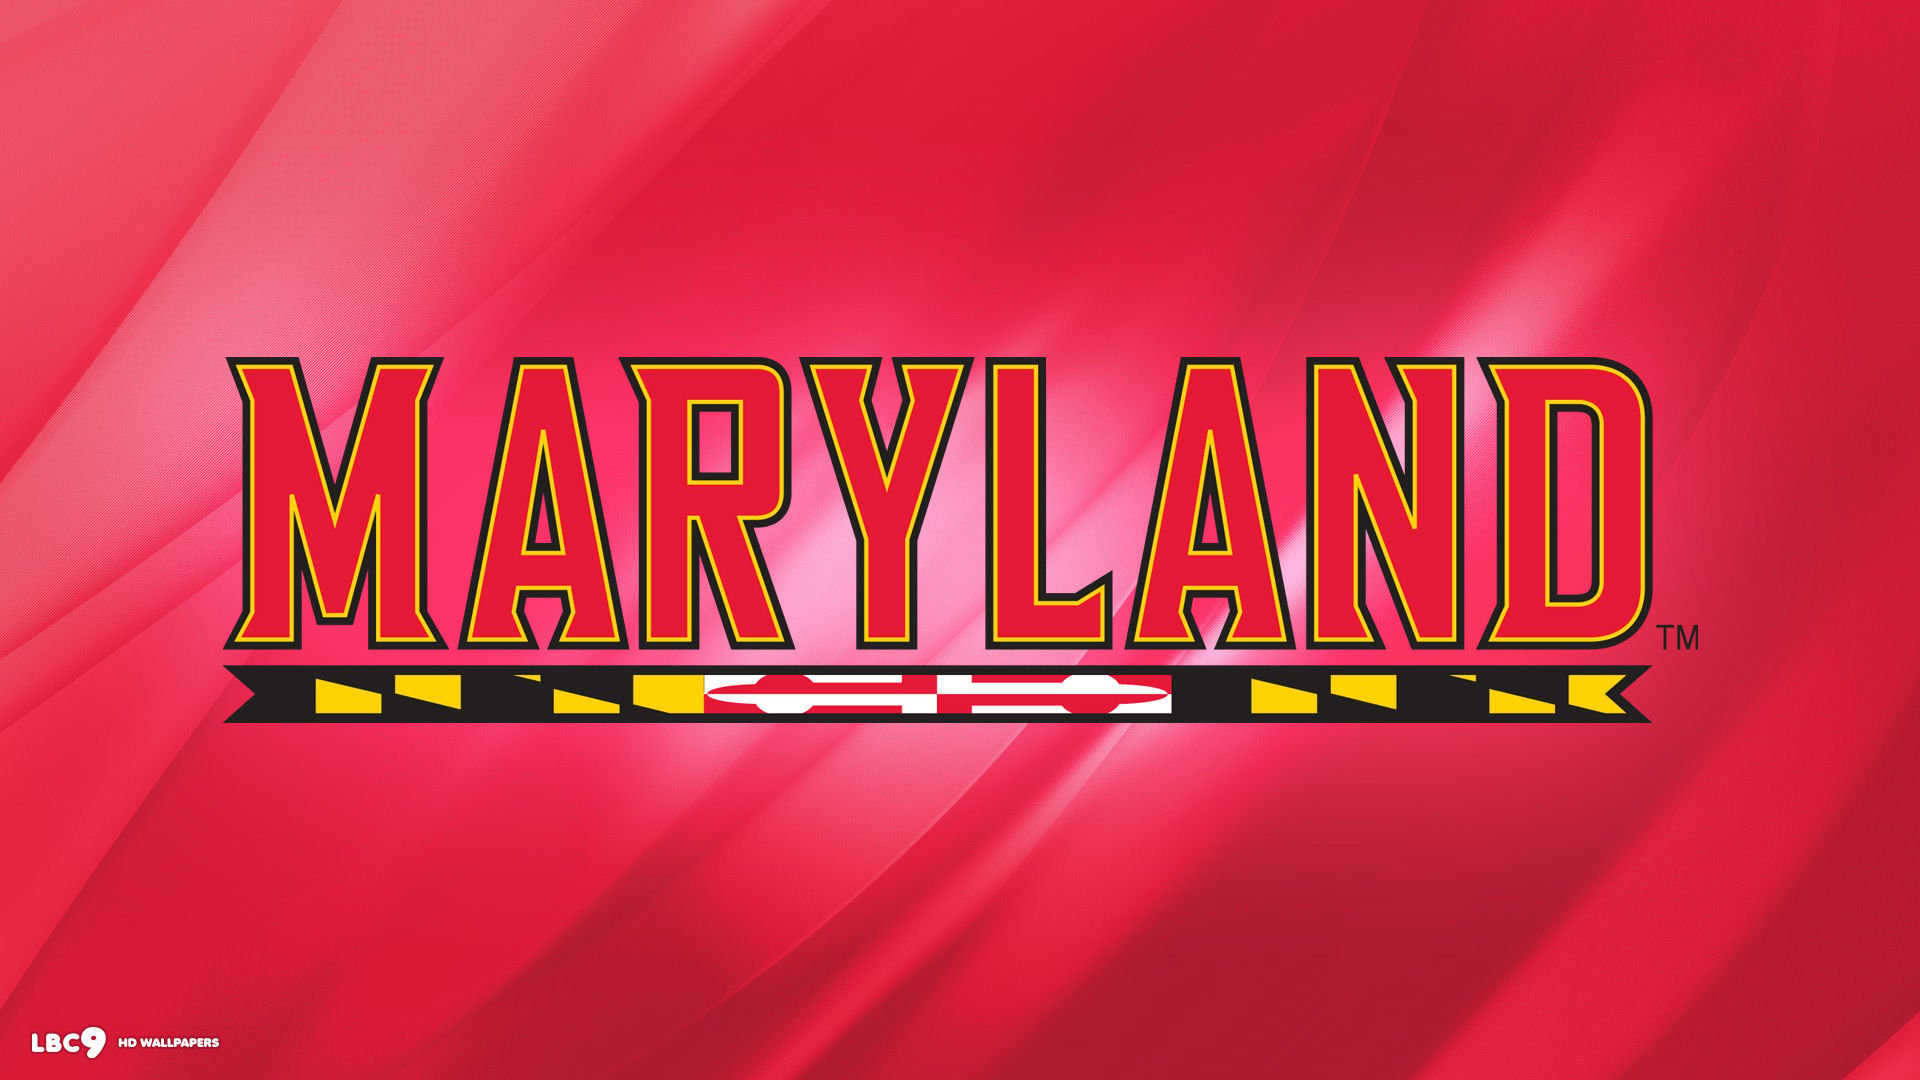 maryland terrapins wallpaper 11 college athletics hd backgrounds 1920x1080